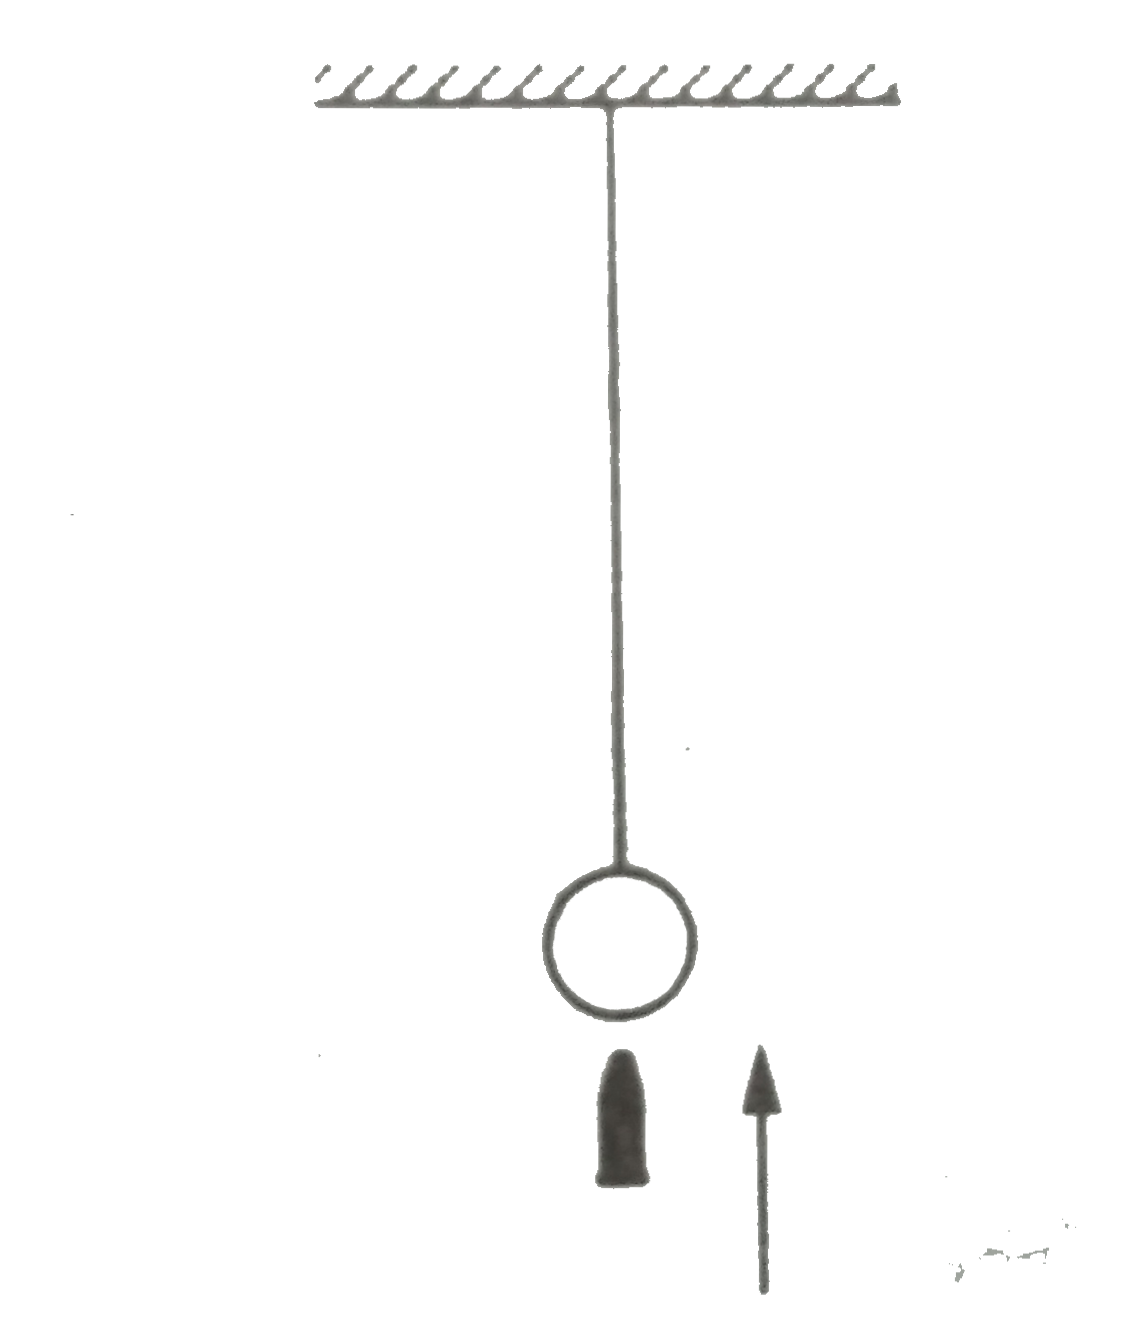 A bullet of mass 50g if fired from below into the bob of mass 450g of a long simple pendulum as shown in Fig. The bullet remains inside the bob and the bob rises through a height of 1.8m. Find the speed of the bullet.Take g=10 m/s^2